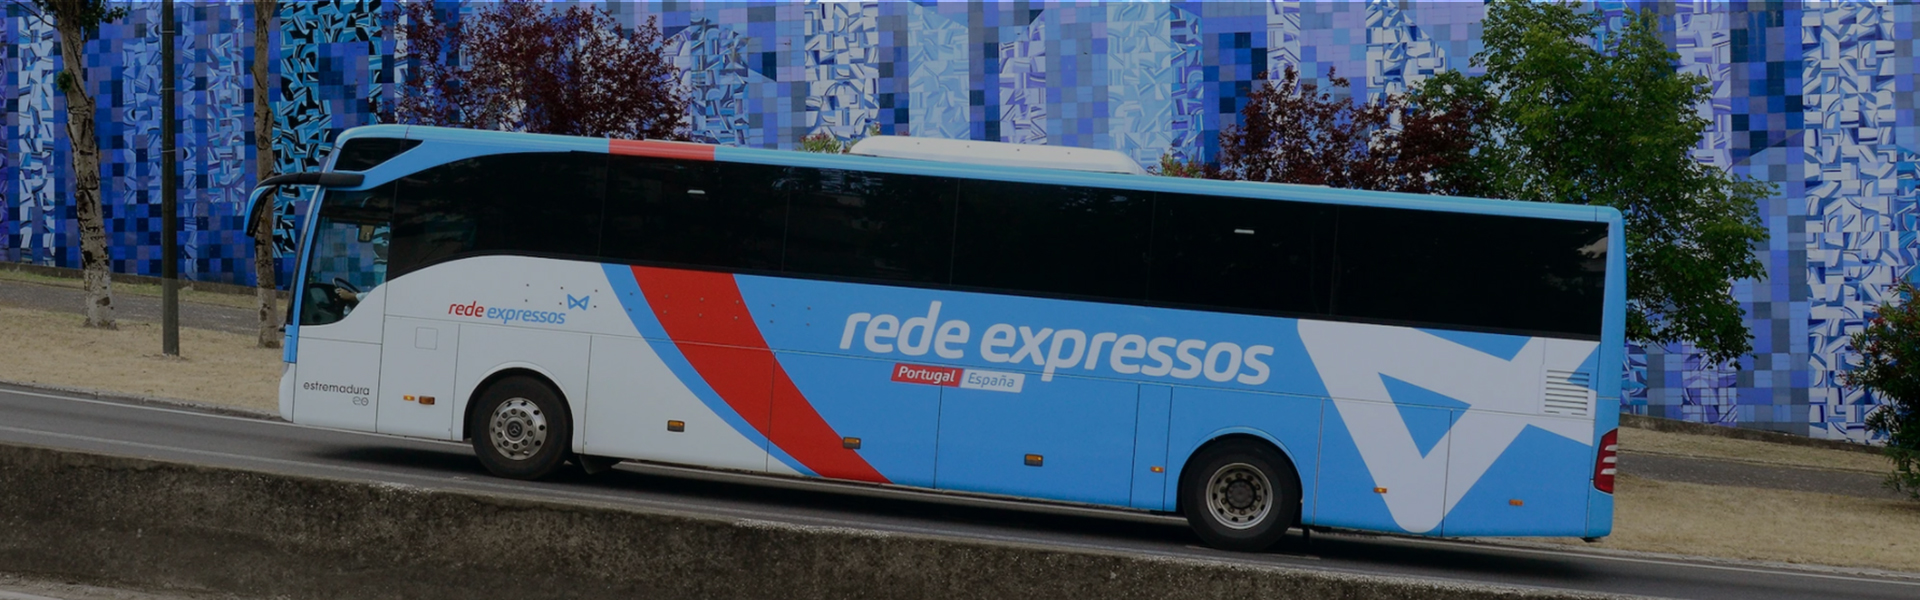 Rede Expressos in Portugal rolls out PAX A920Pro to accept onboard digital payments